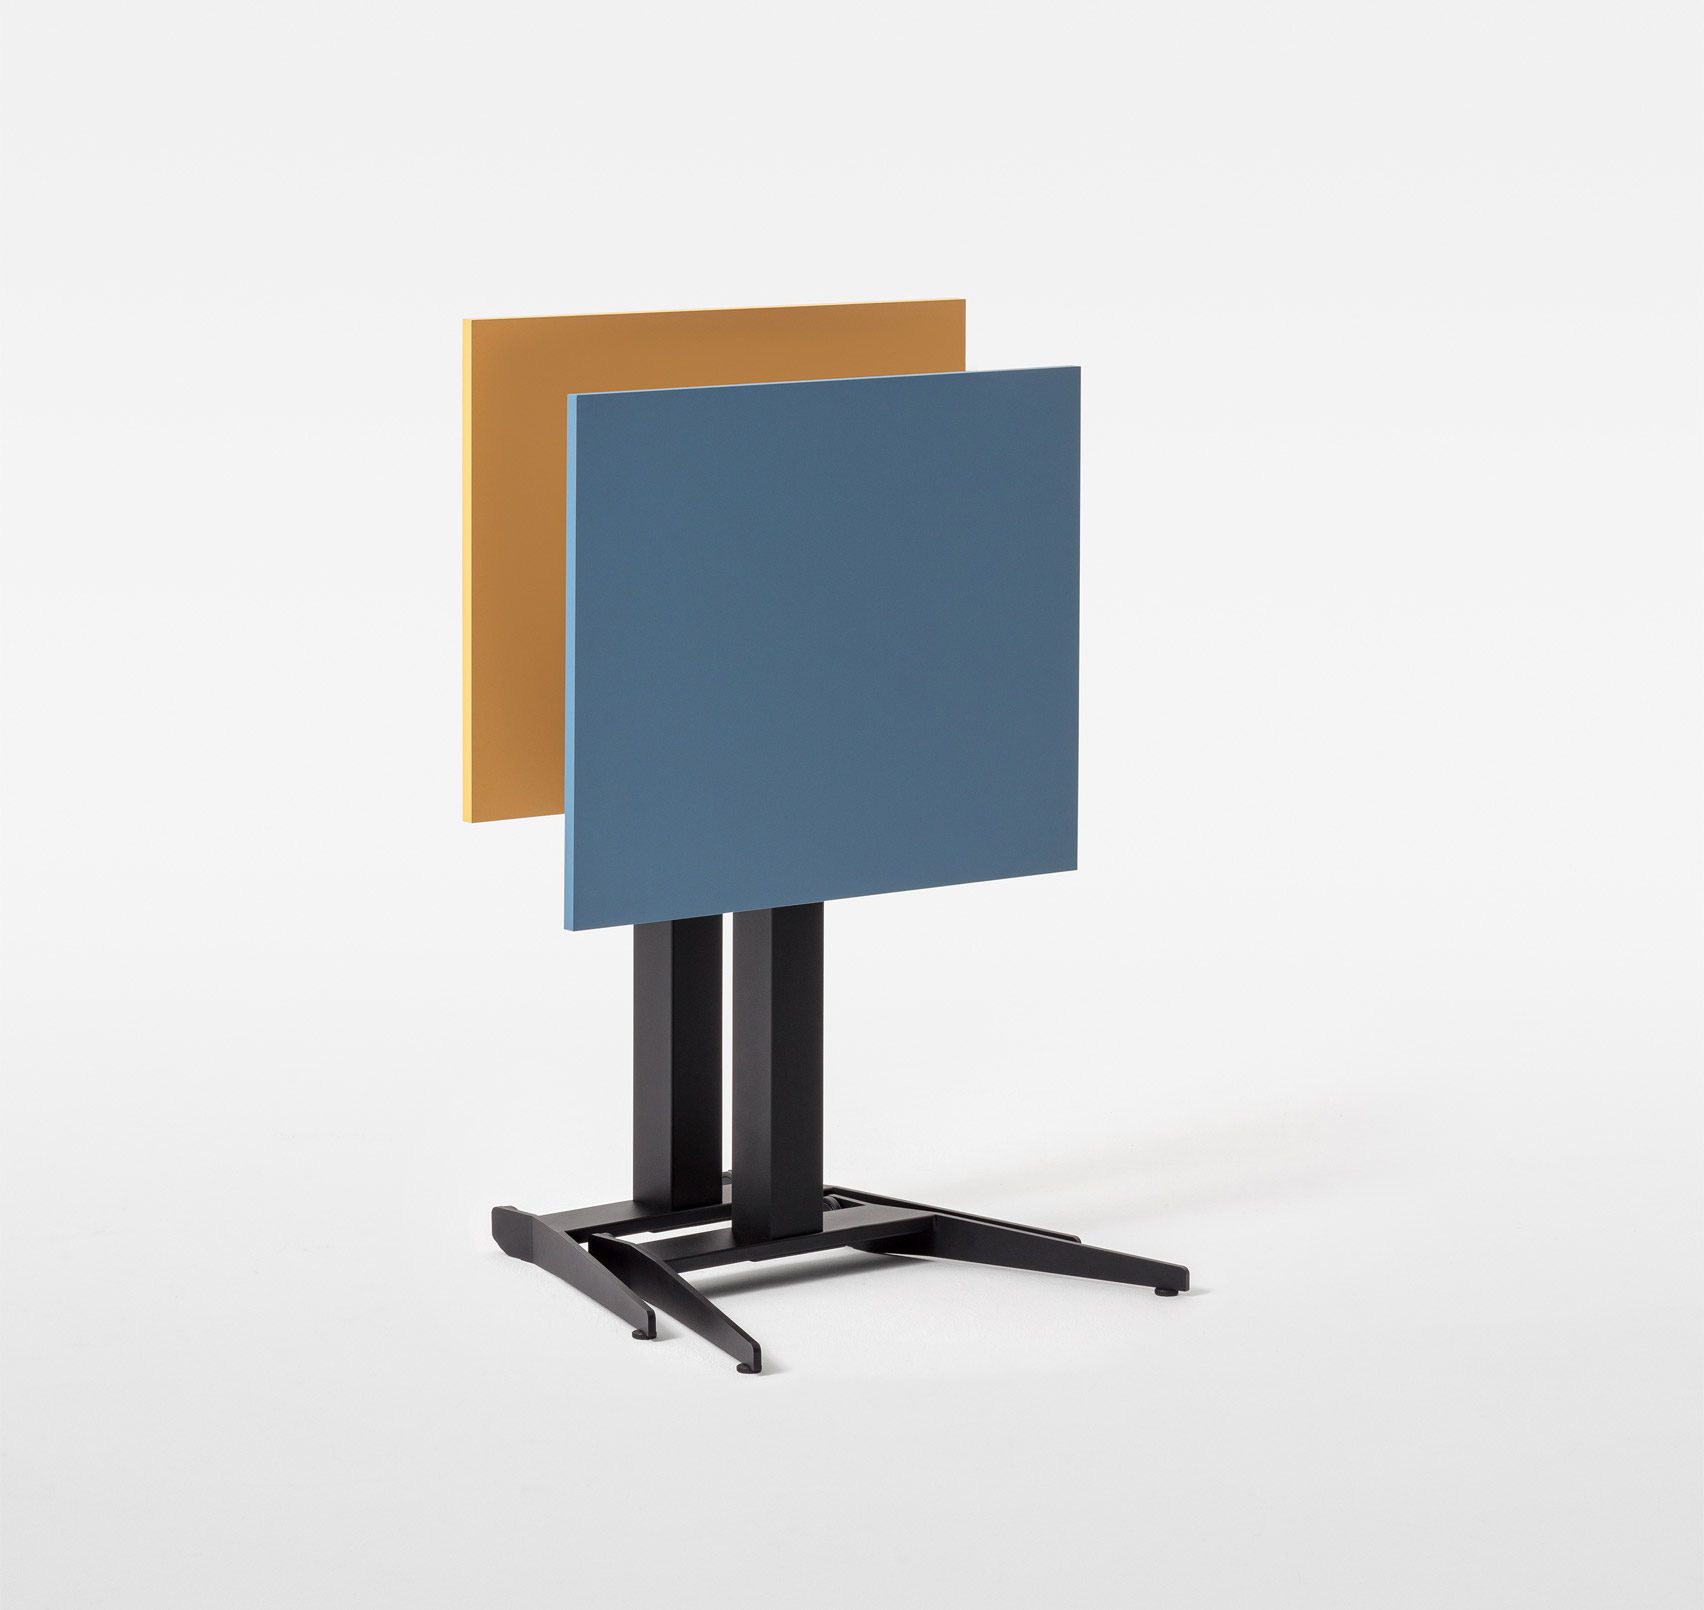 A photograph of the height-adjustable Follow Me table by Mara